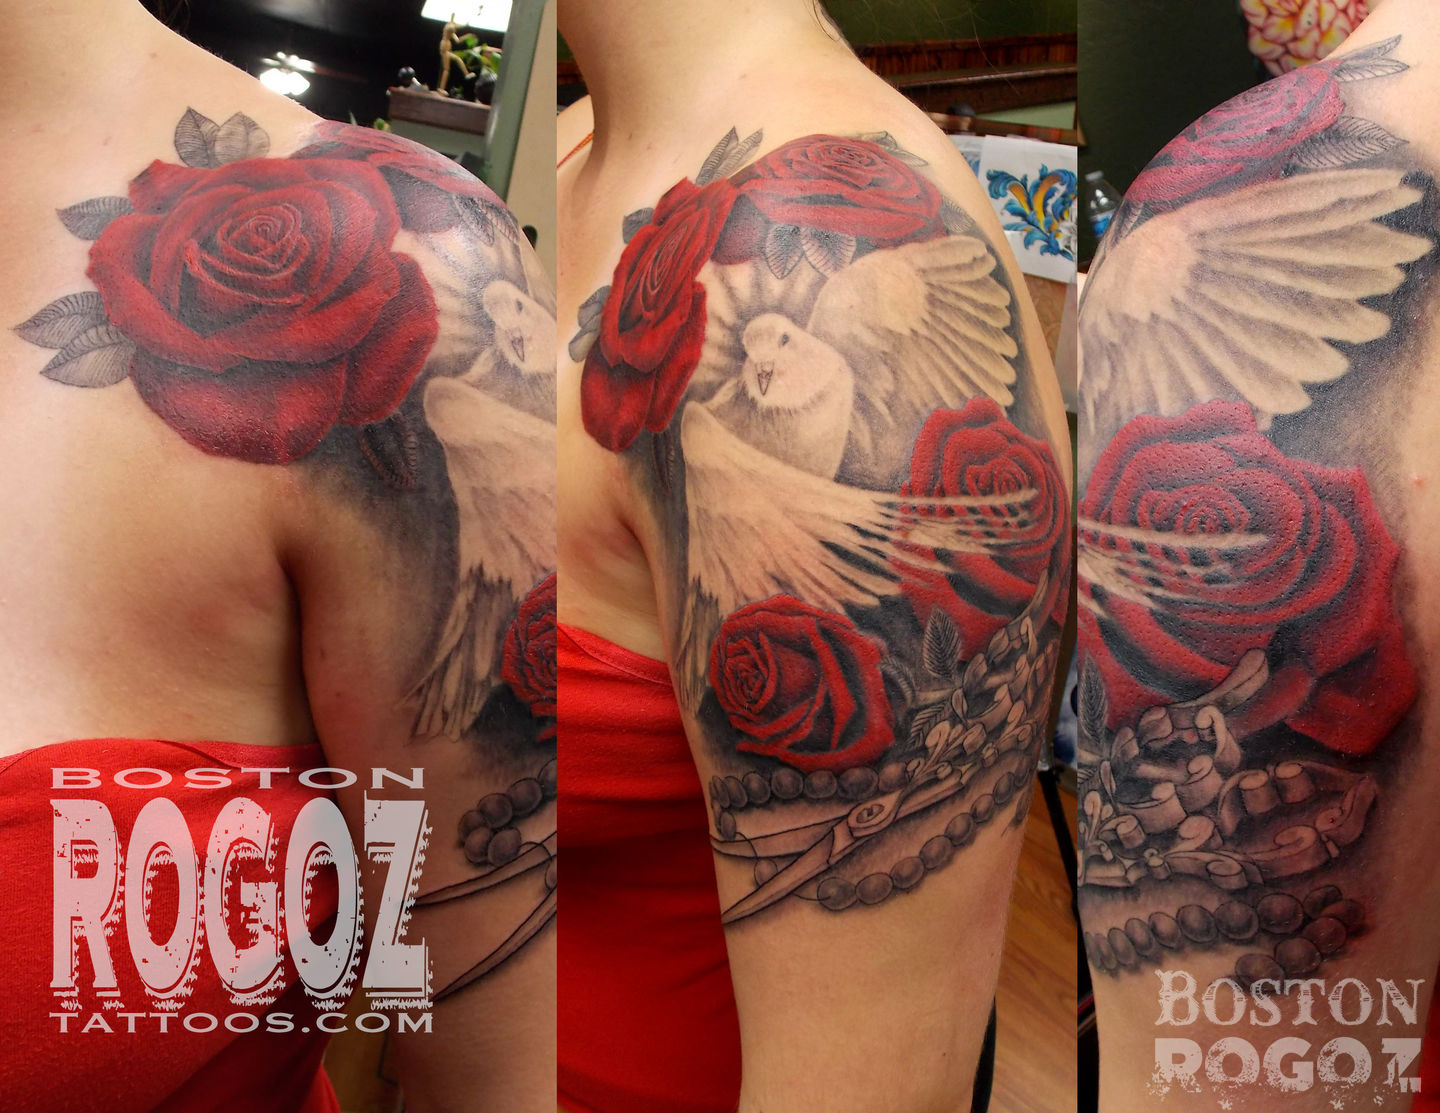 Bostonrogoz Dove And Roses With Pearls And Hairdresser Shears